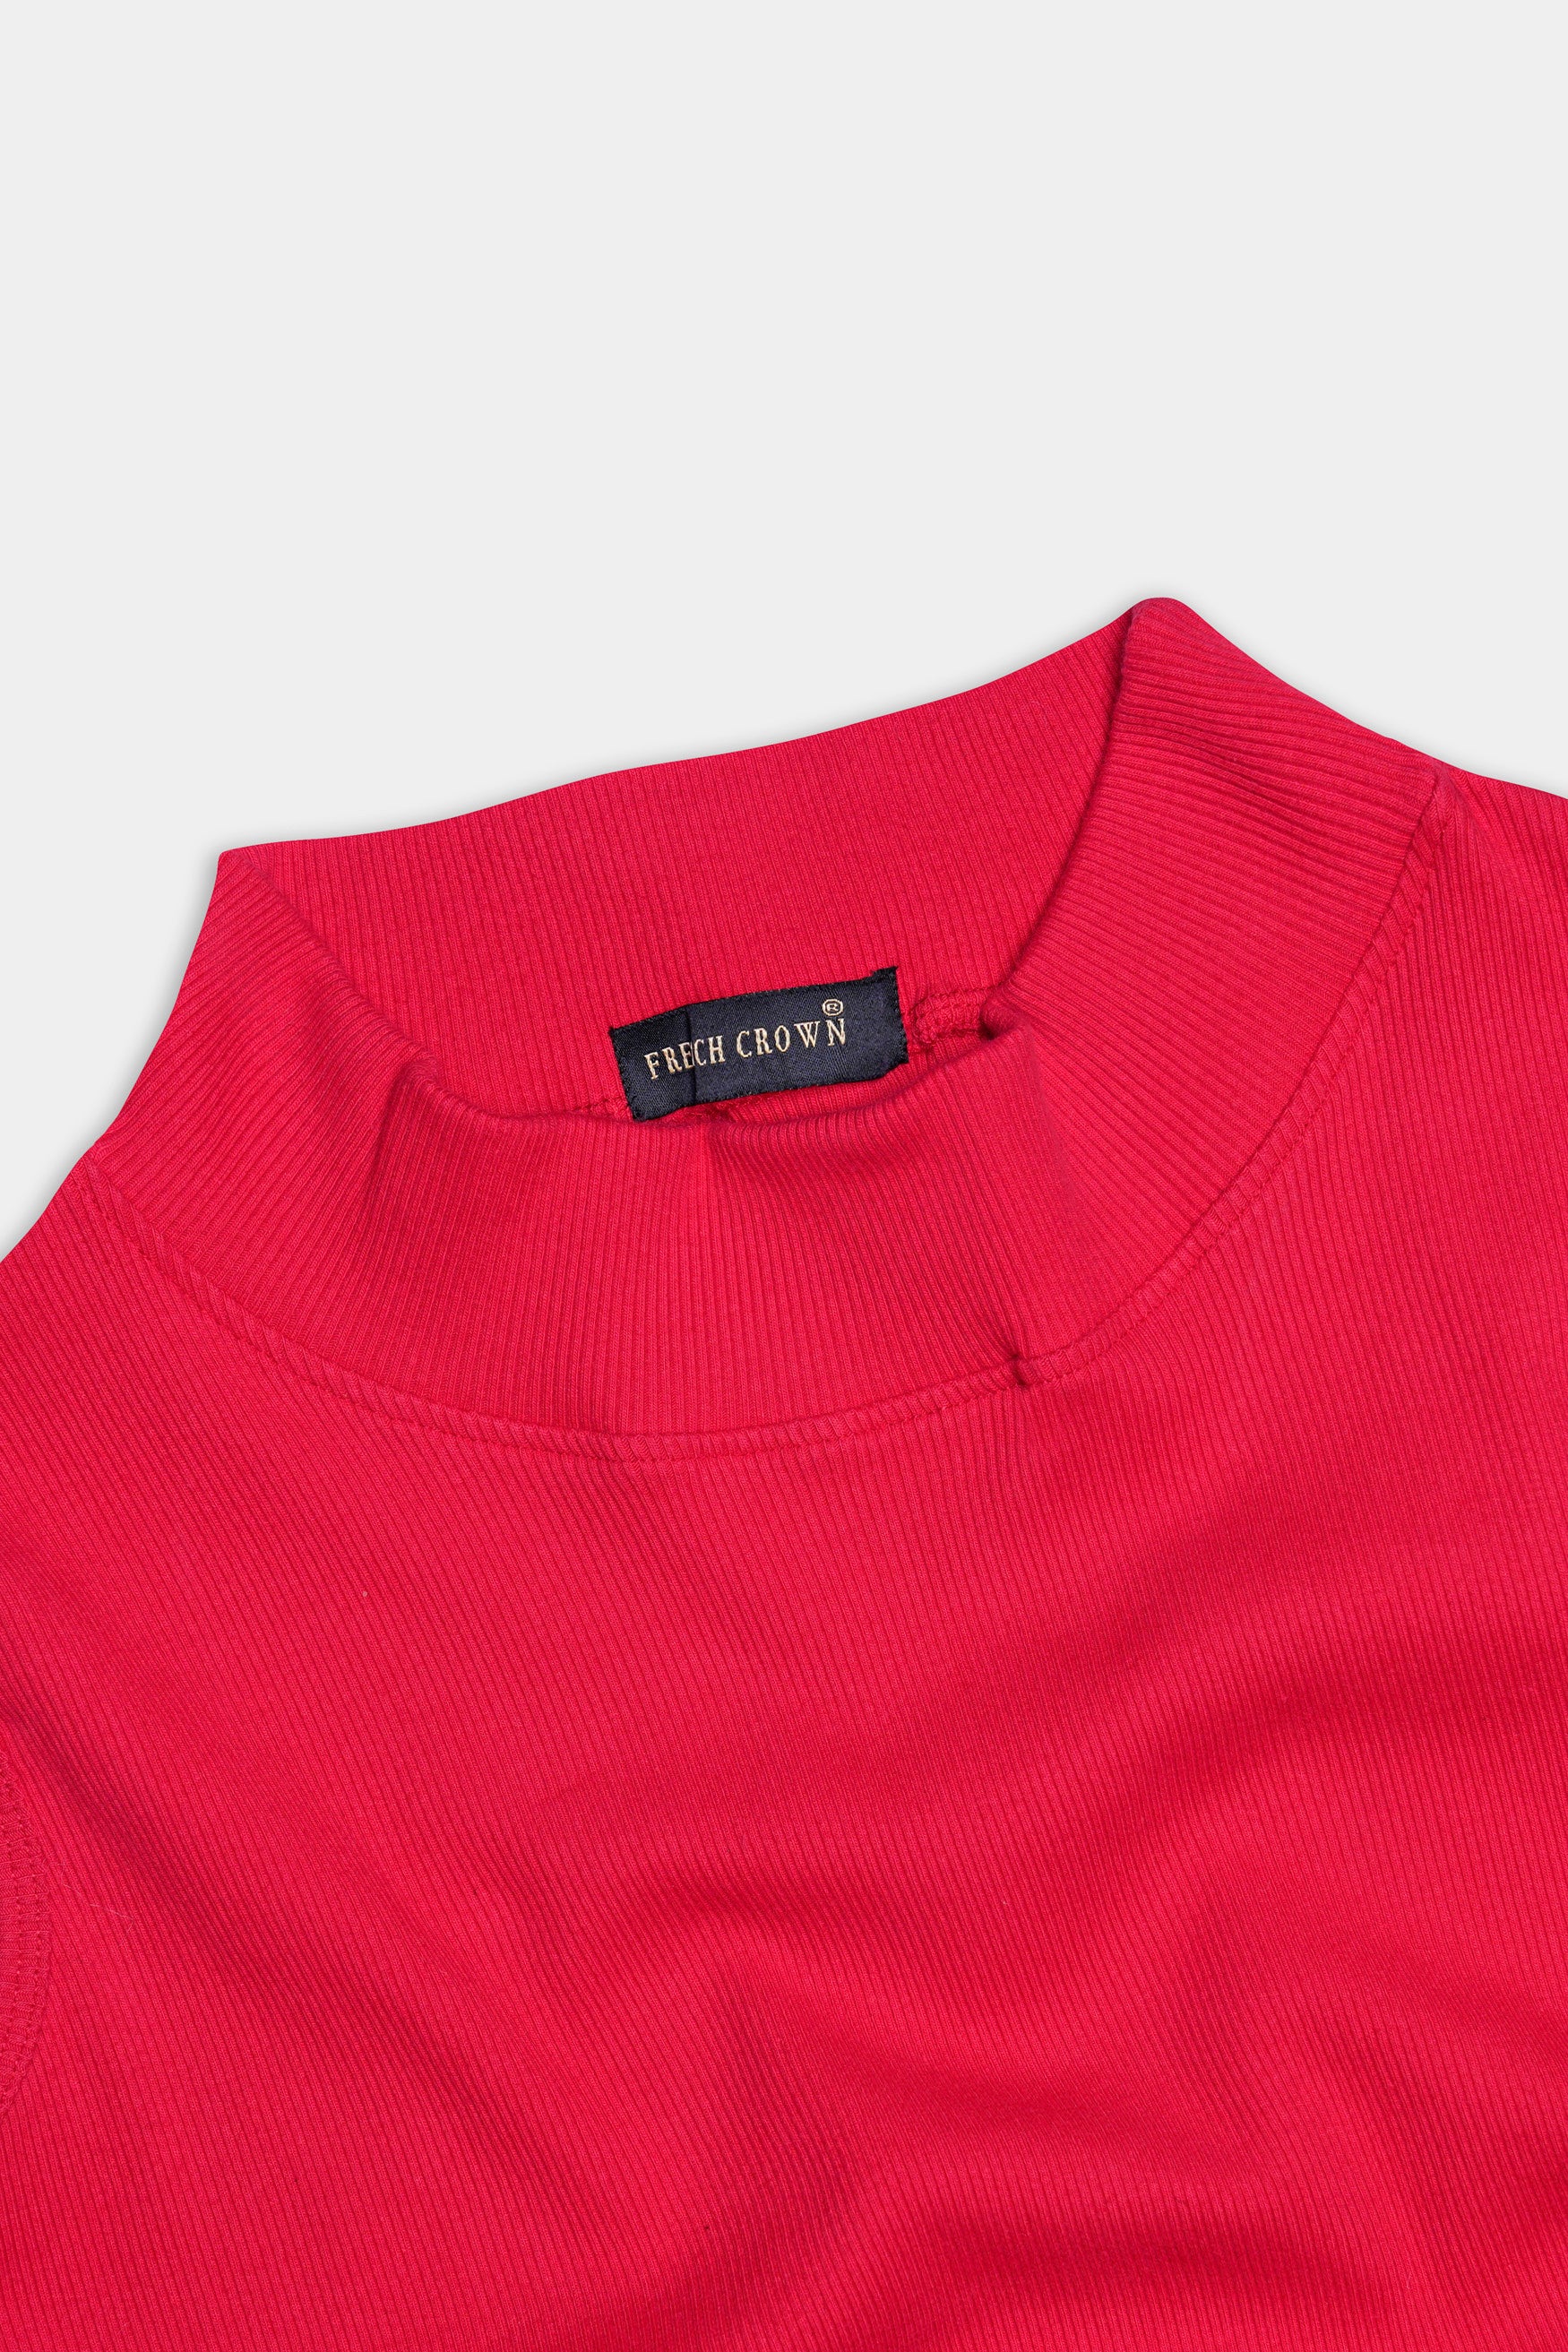 Radical Red Premium Cotton Knit Stretchable Crop Top